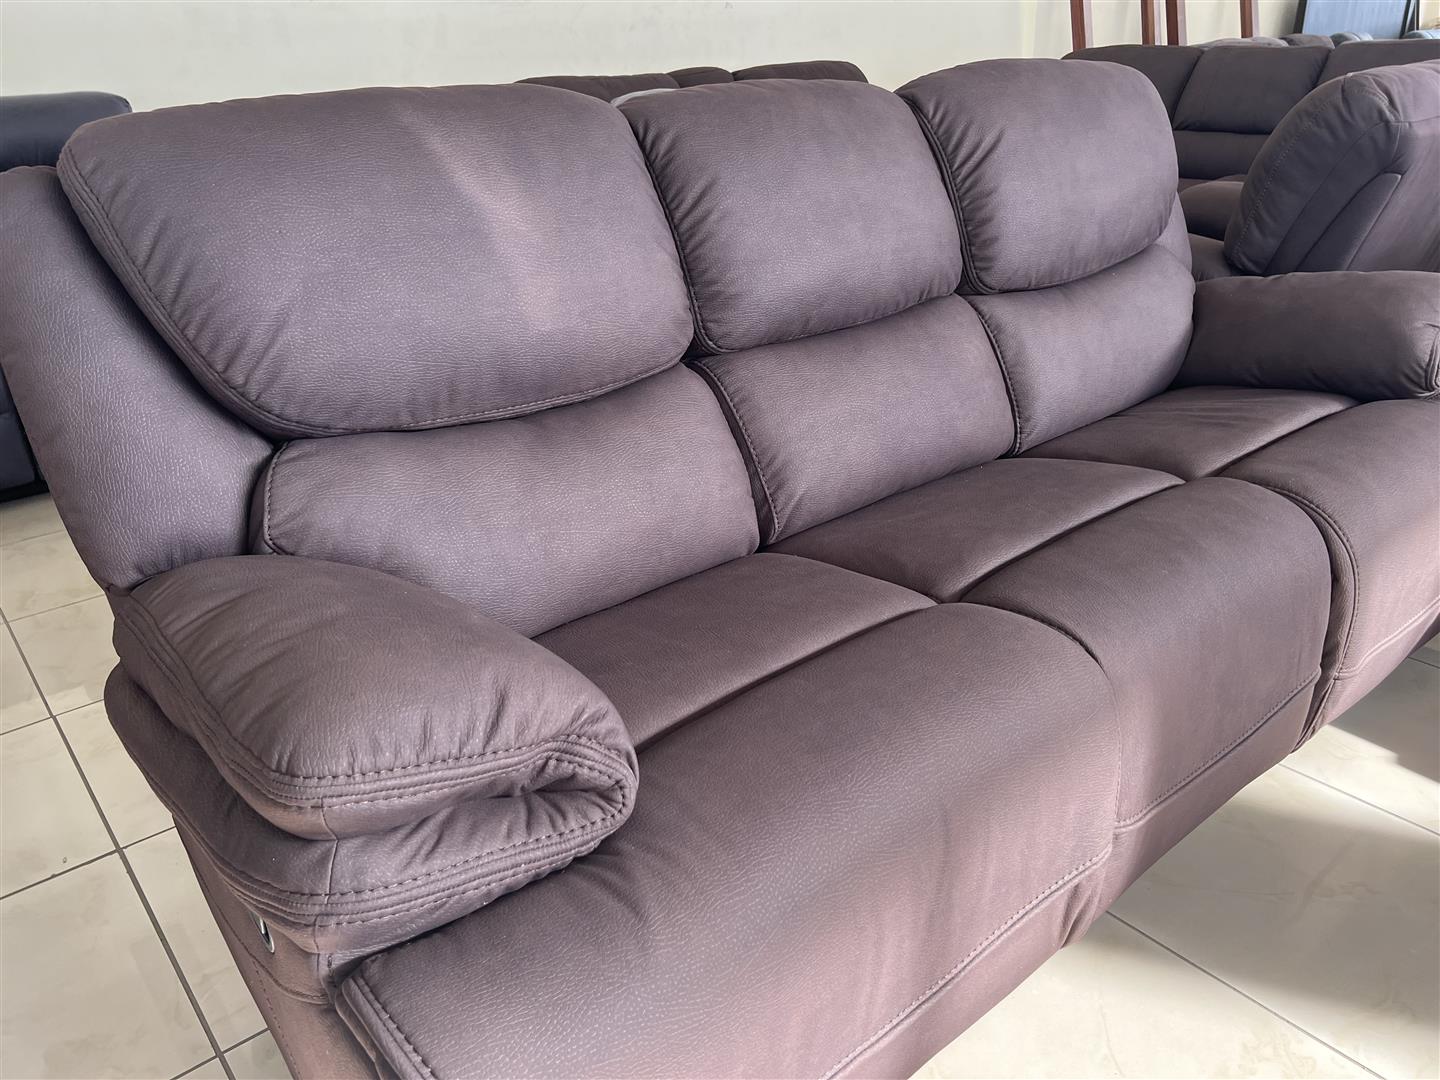 stanley-chocolate-brown-recliners-2